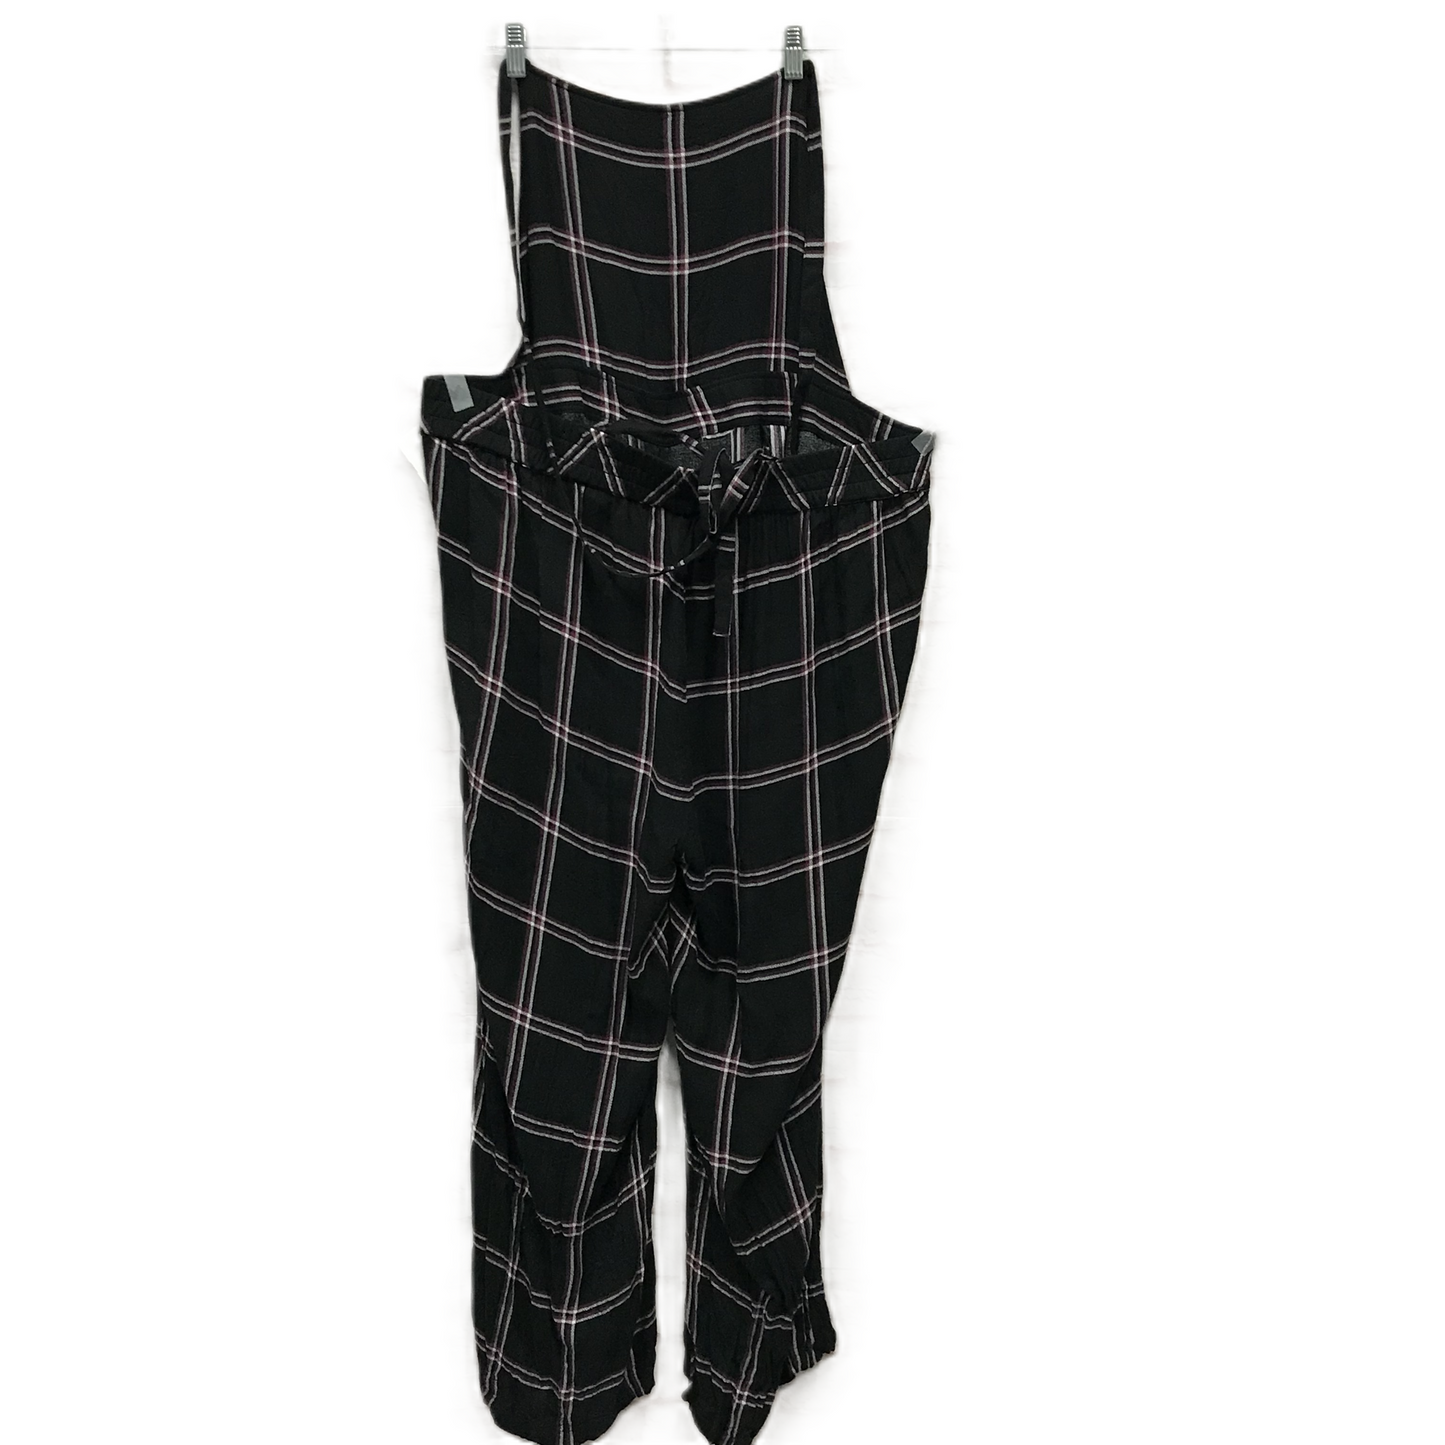 Black Overalls By Torrid, Size: 2x